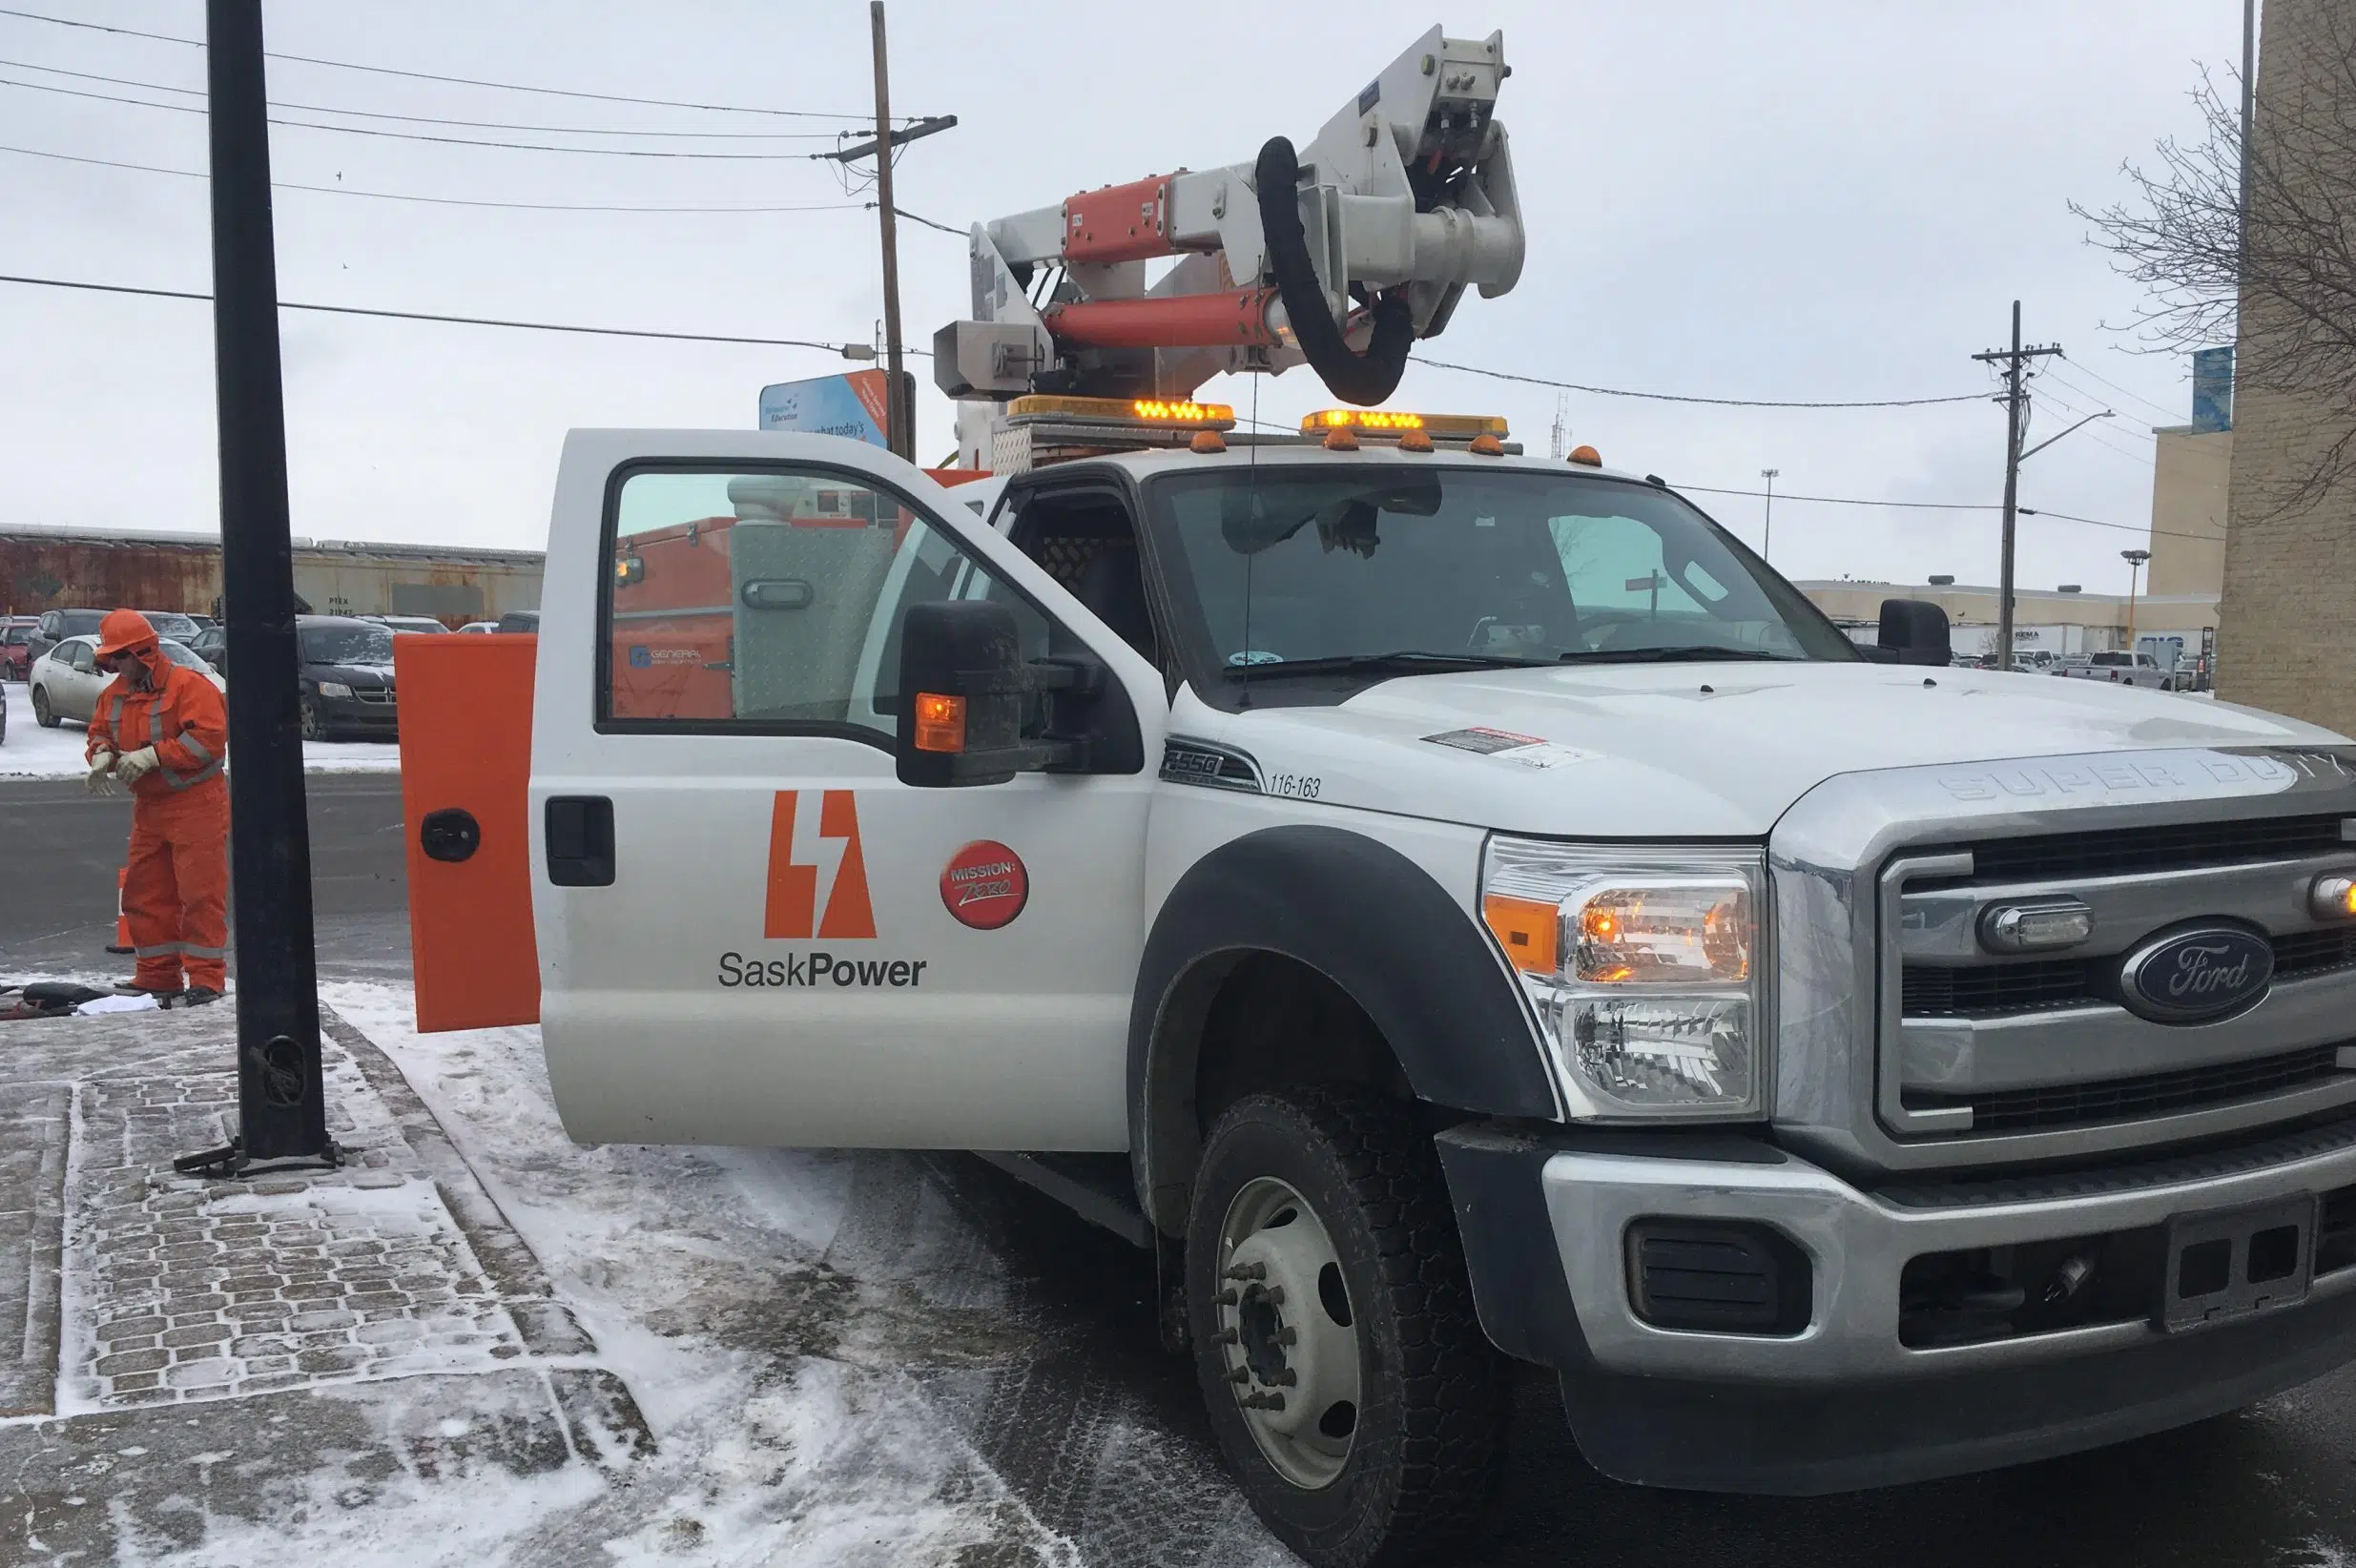 Concerns flagged over SaskPower's maintenance, data records